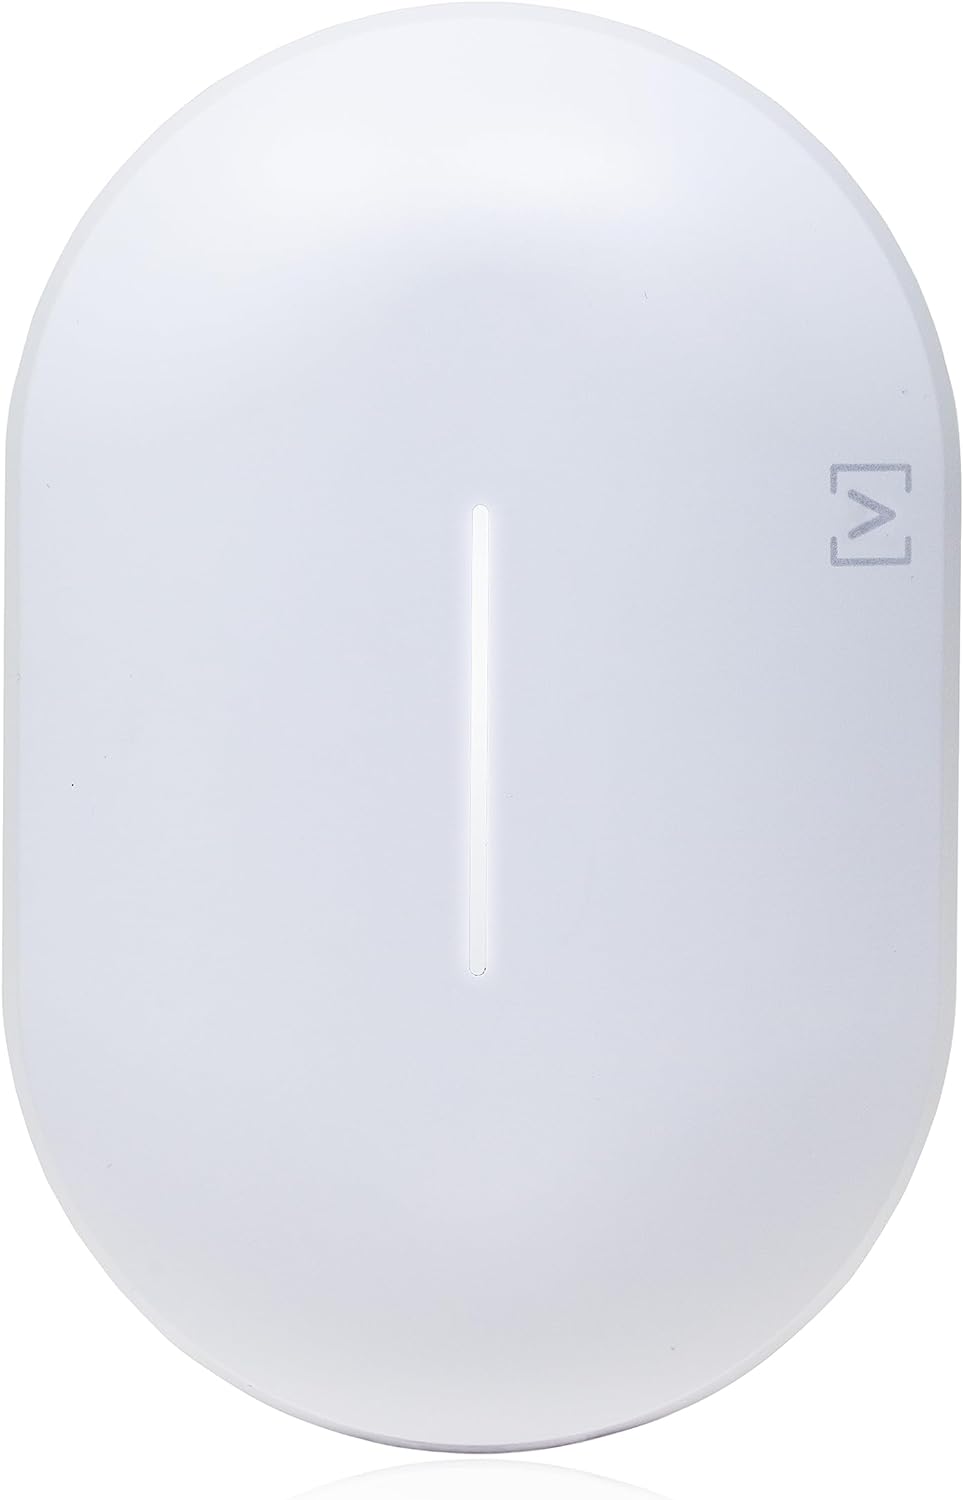 Alta Labs AP6 Dual-Band Wireless WiFi 6 Access Point